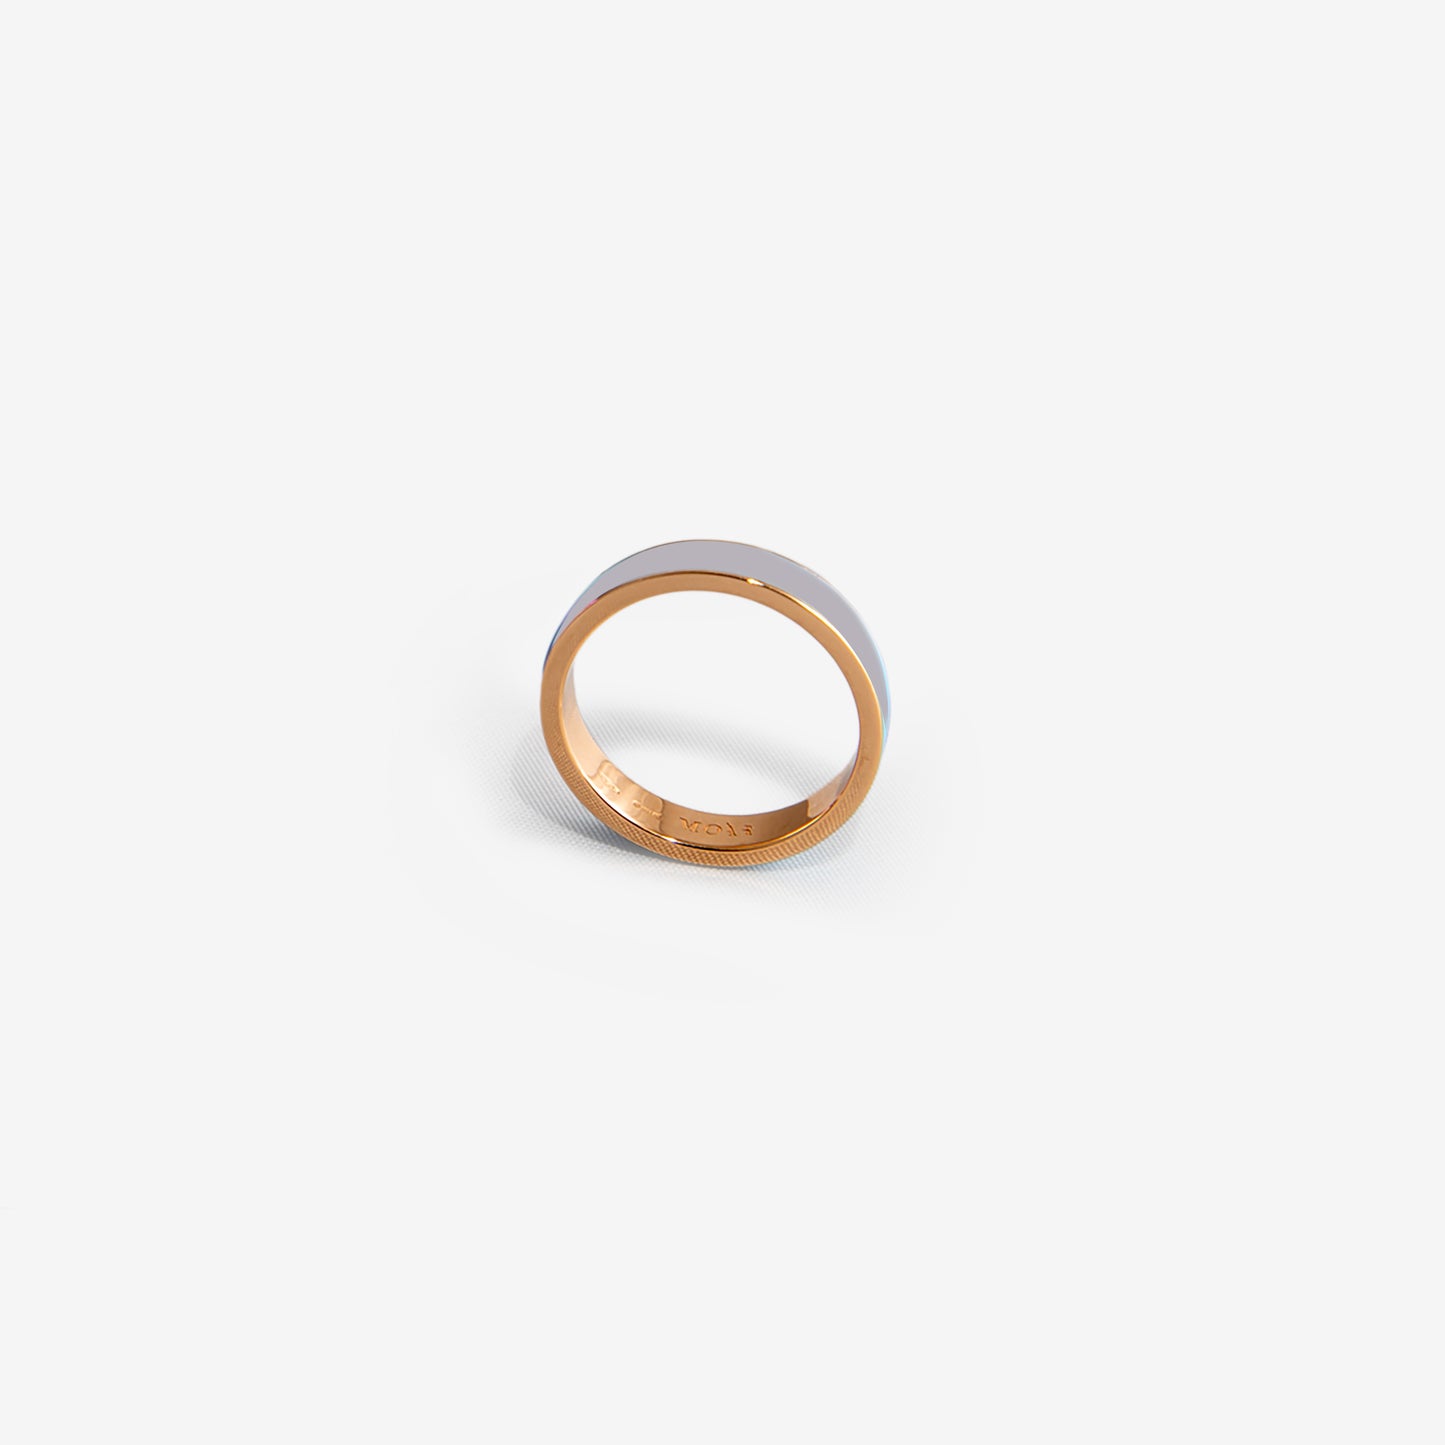 Band ring in gold and cool gray enamel